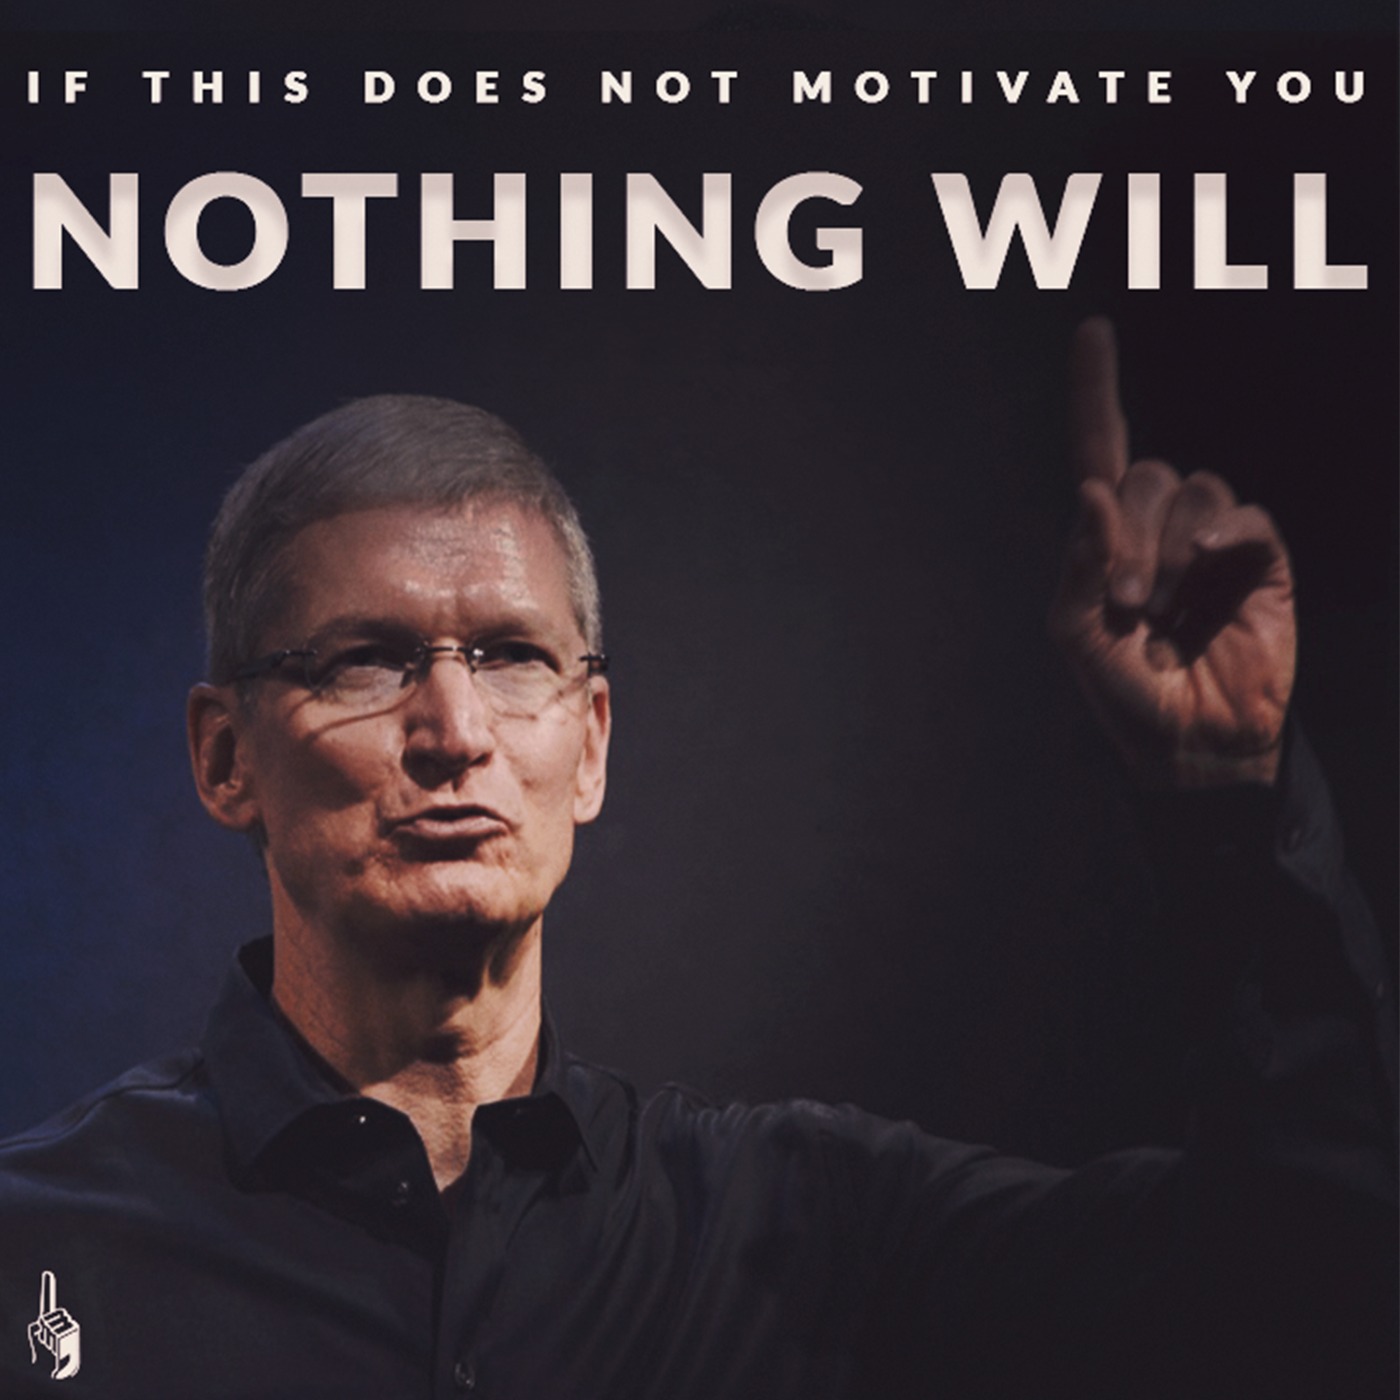 Tim Cook Motivational Podcast | If this not Motivate You, NOTHING WILL | 1 Minute Motivation